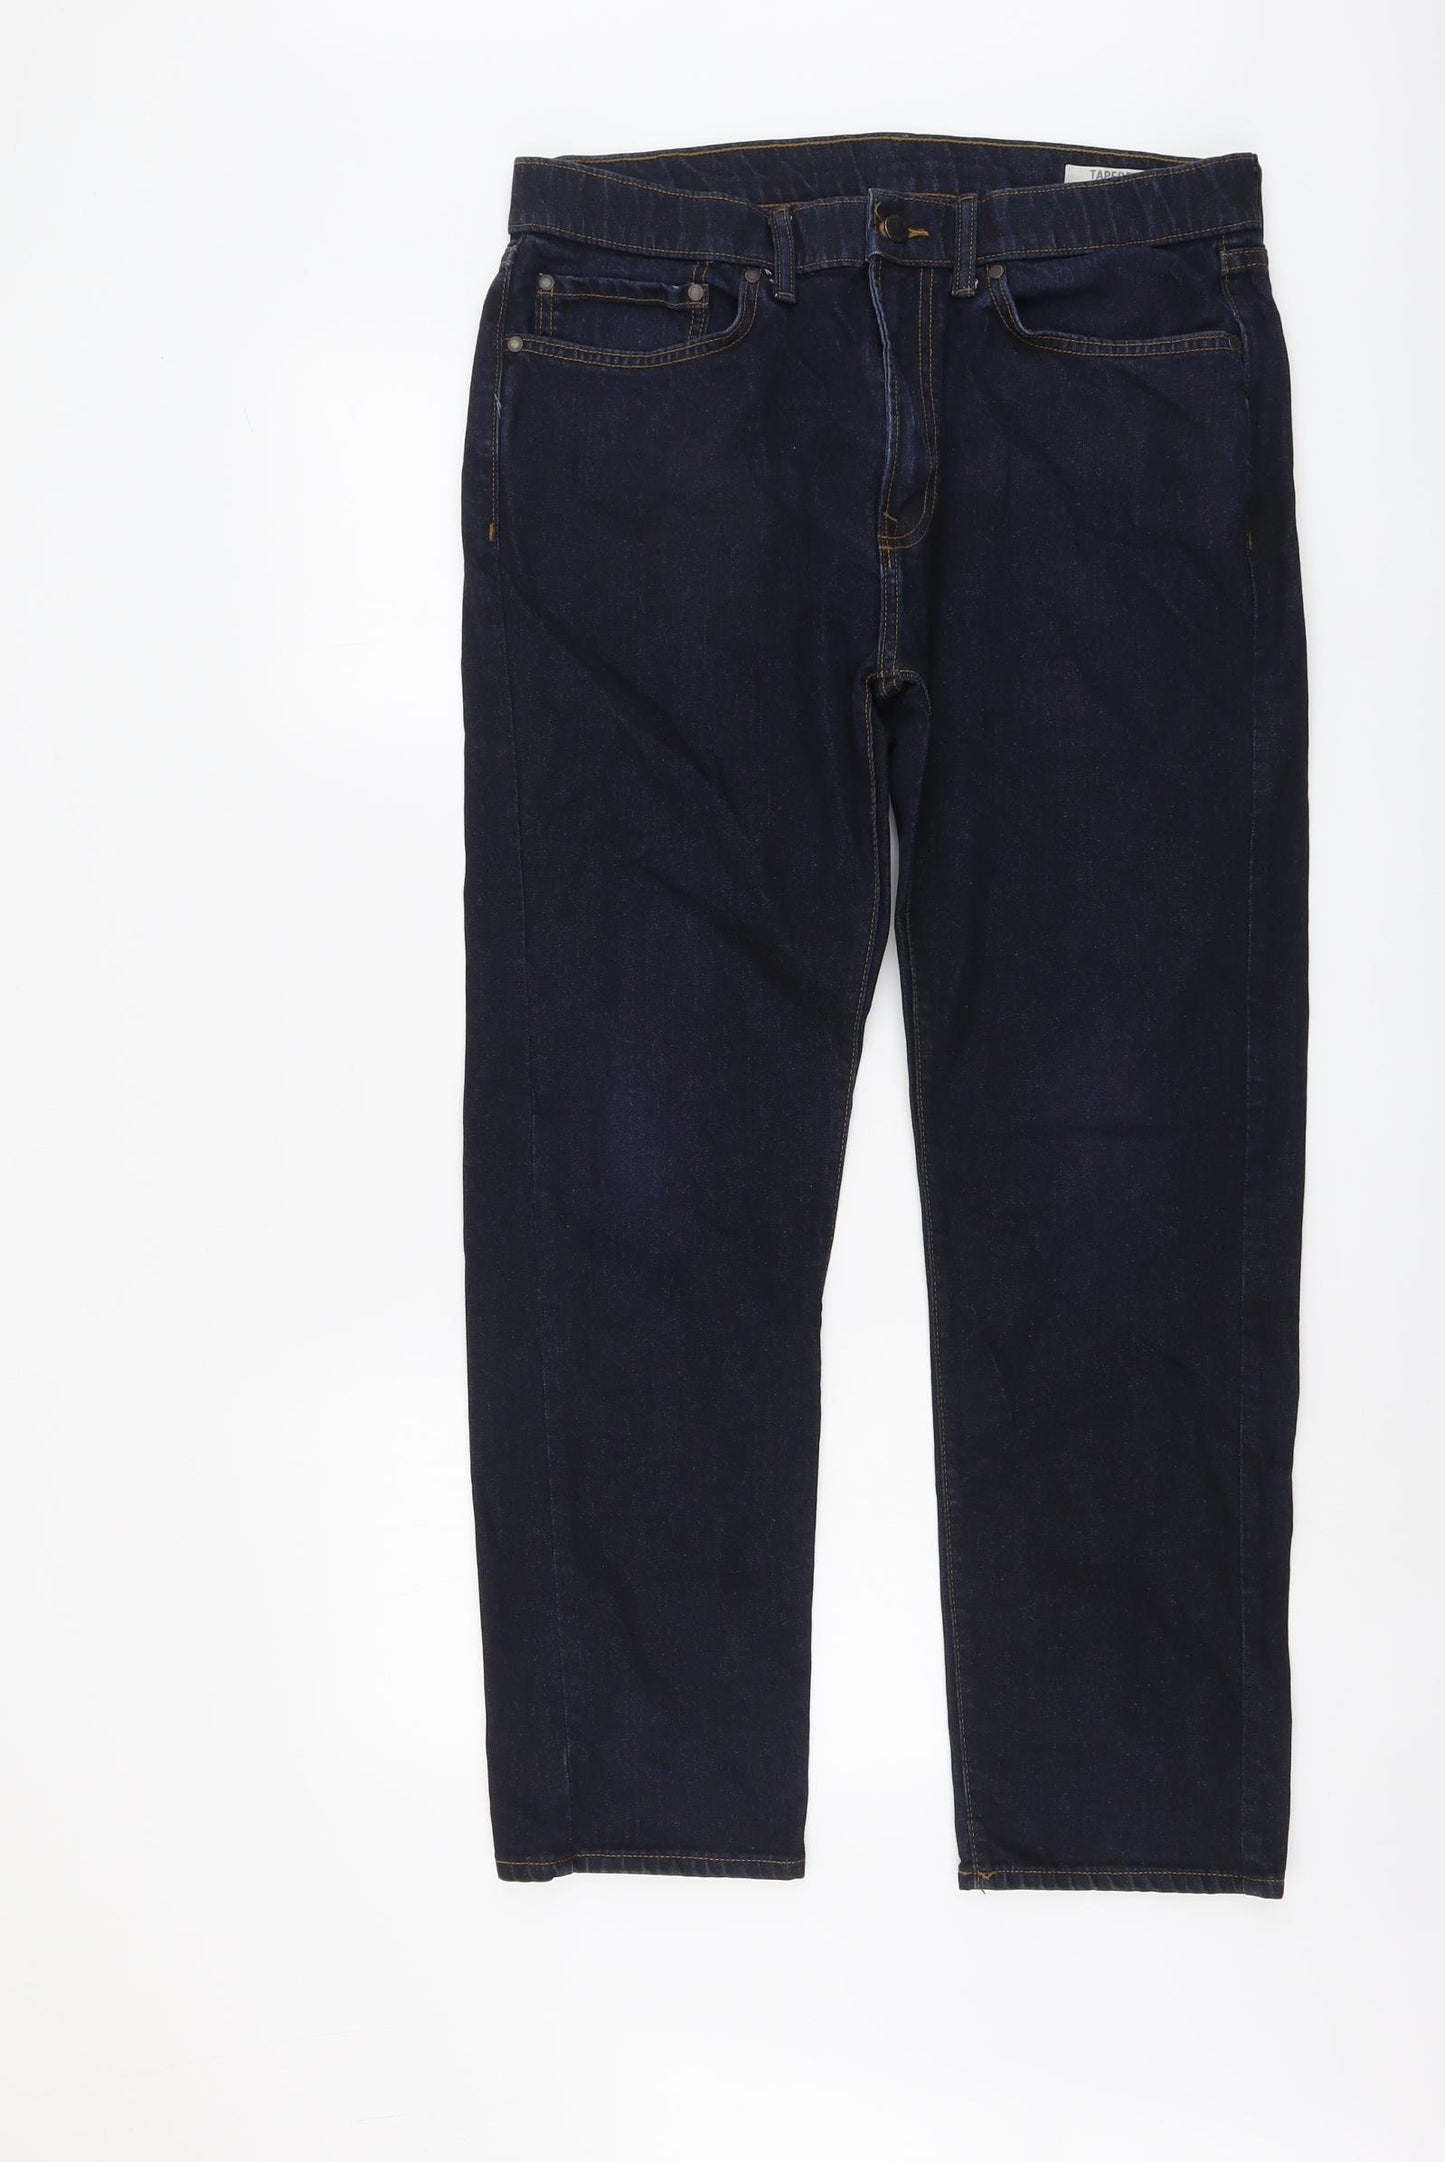 Marks and Spencer Mens Blue Cotton Tapered Jeans Size 34 in L29 in Reg ...